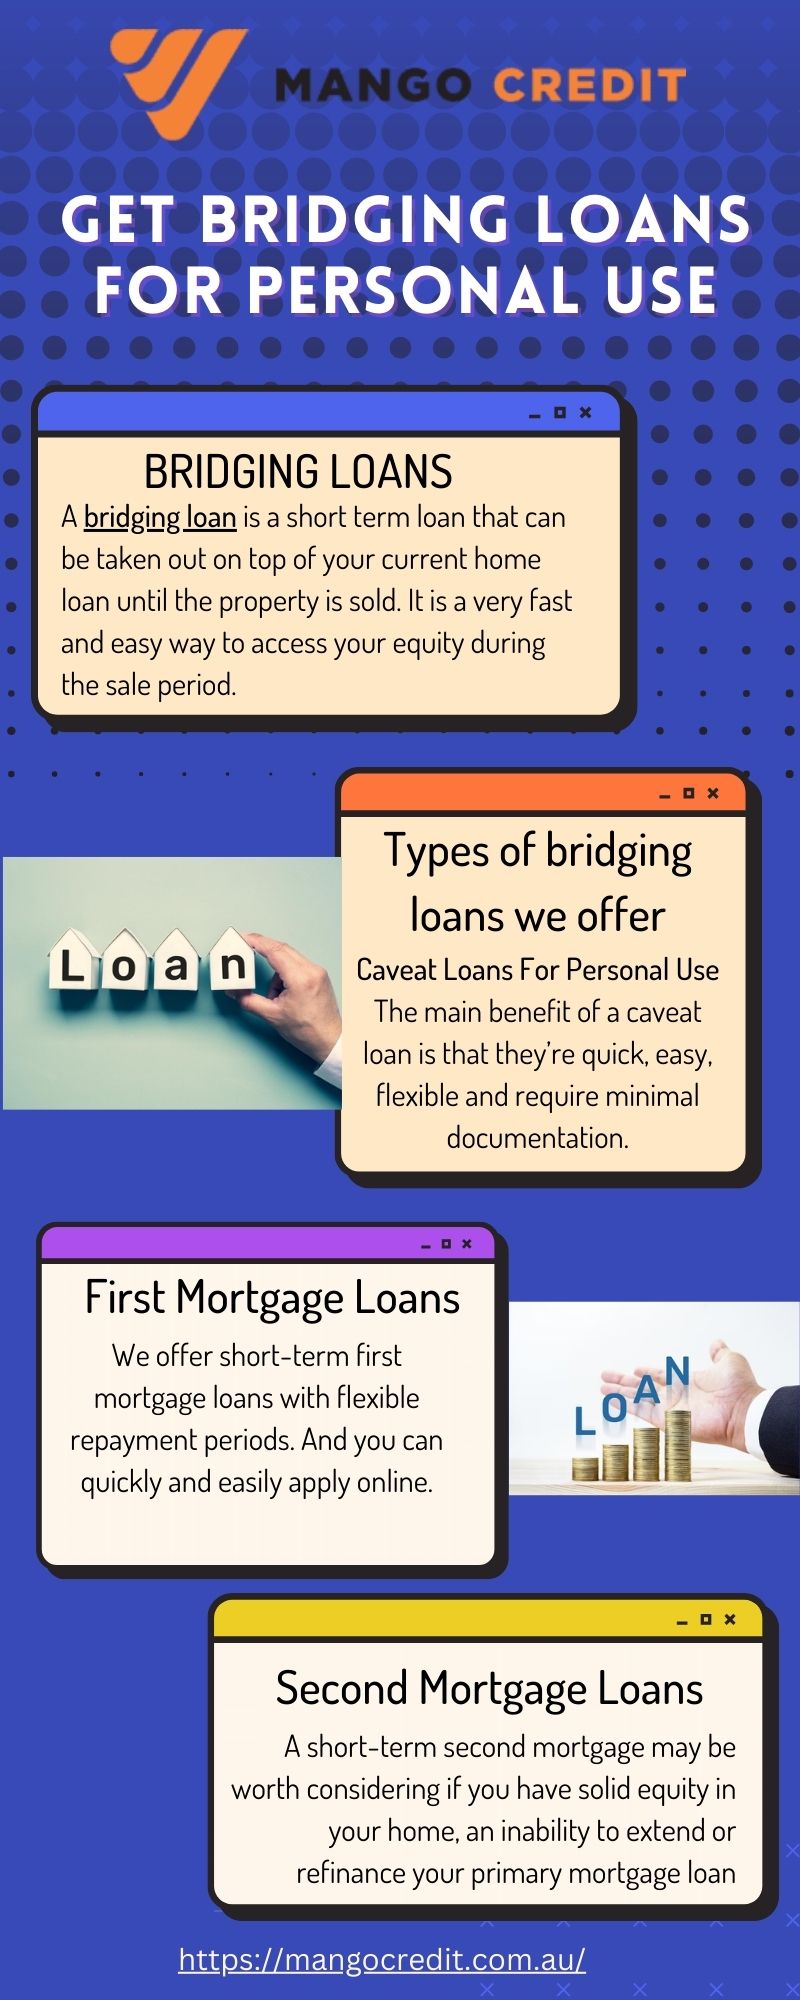 Get BRIDGING LOANS FOR PERSONAL USE | Mango Credit